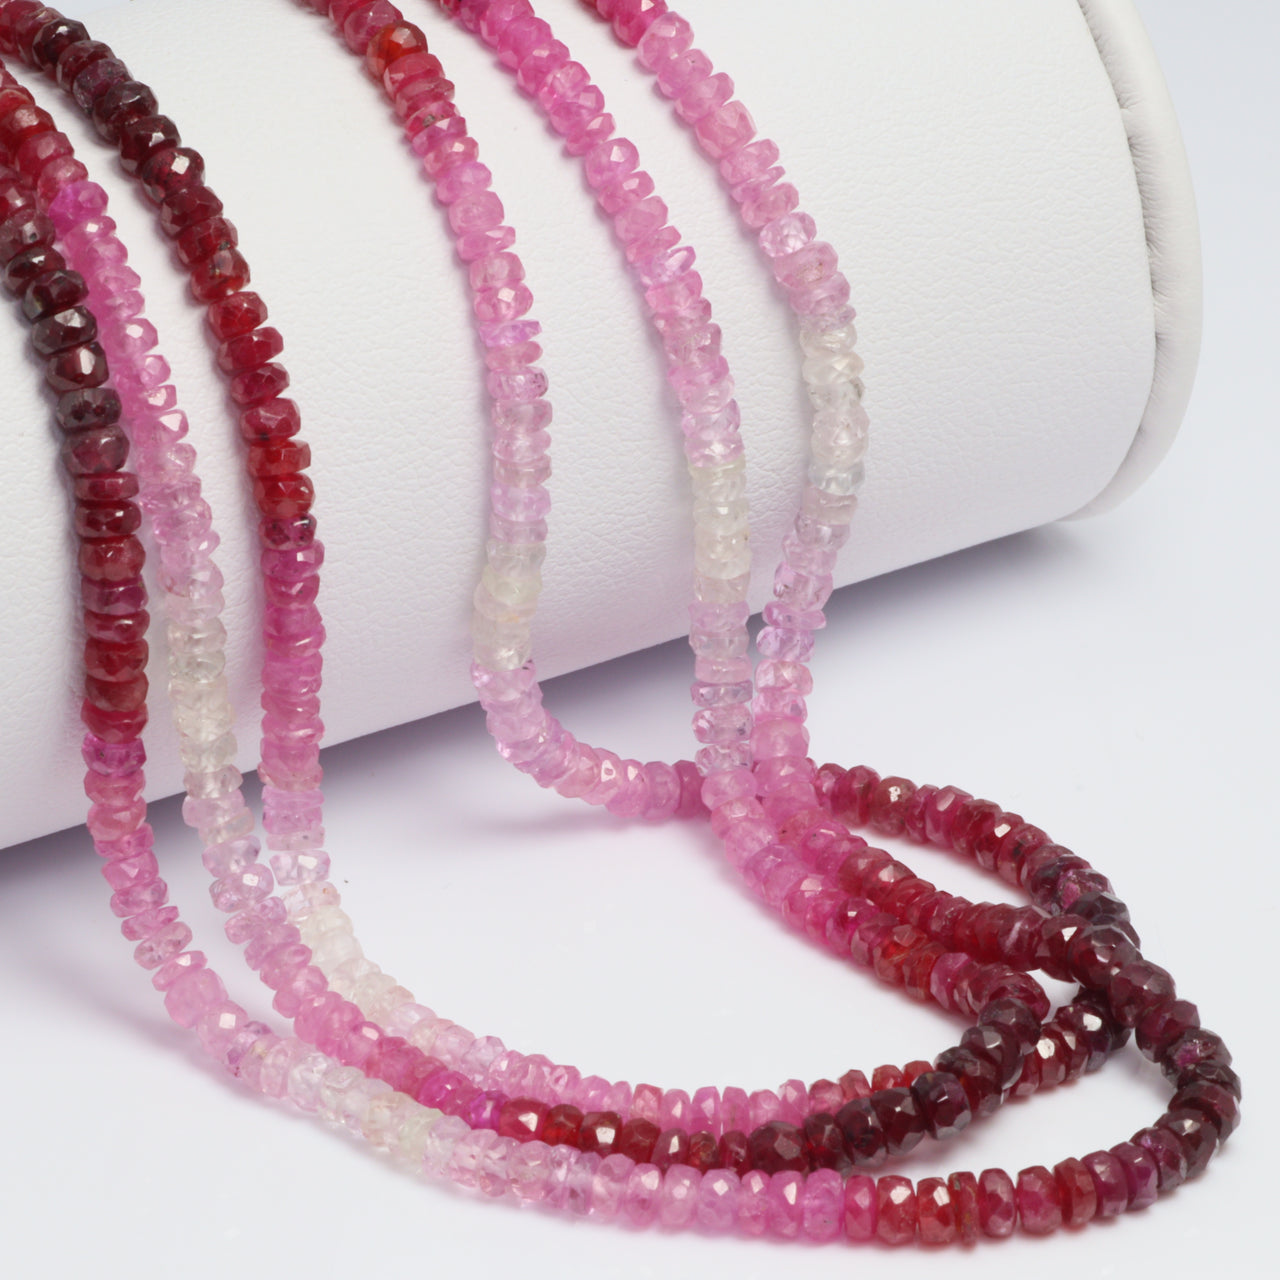 Ombre Red and Pink Ruby 3mm Faceted Rondelles